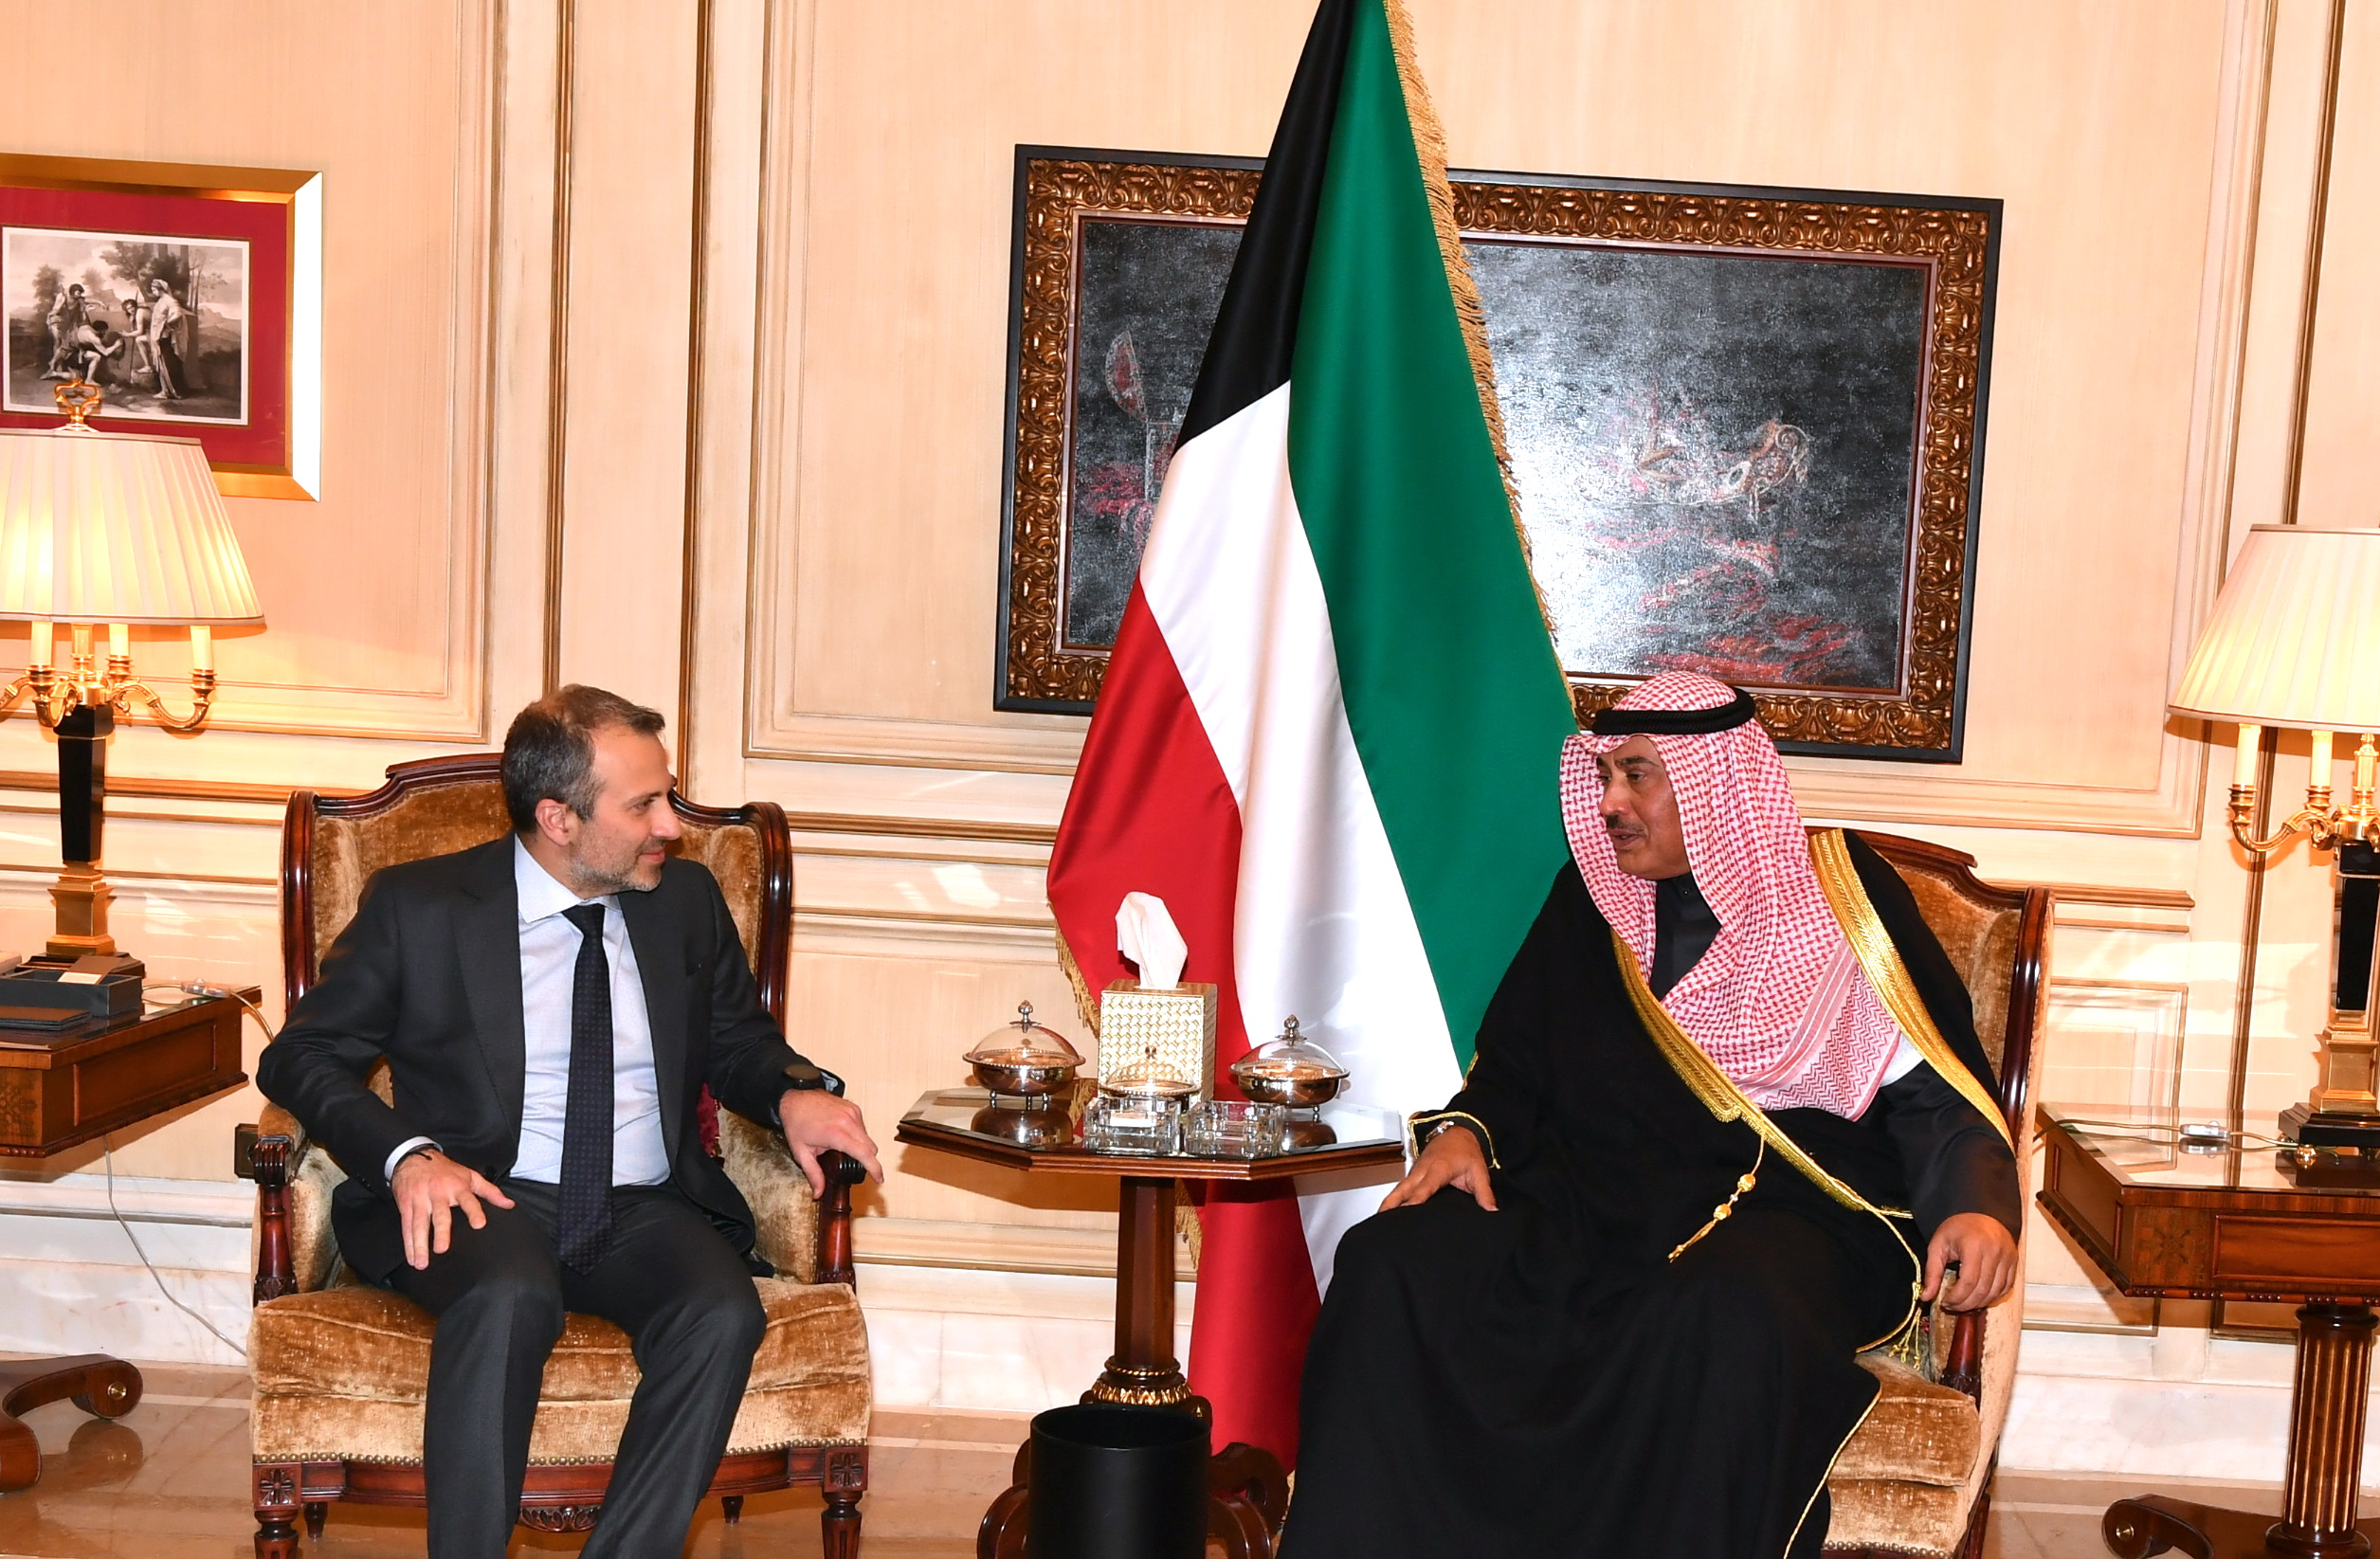 Representative of His Highness the Amir, Deputy Prime Minister and Foreign Minister Sheikh Sabah Al-Khaled meets Lebanon's Minister of Foreign Affairs and Emigrants Gebran Bassil